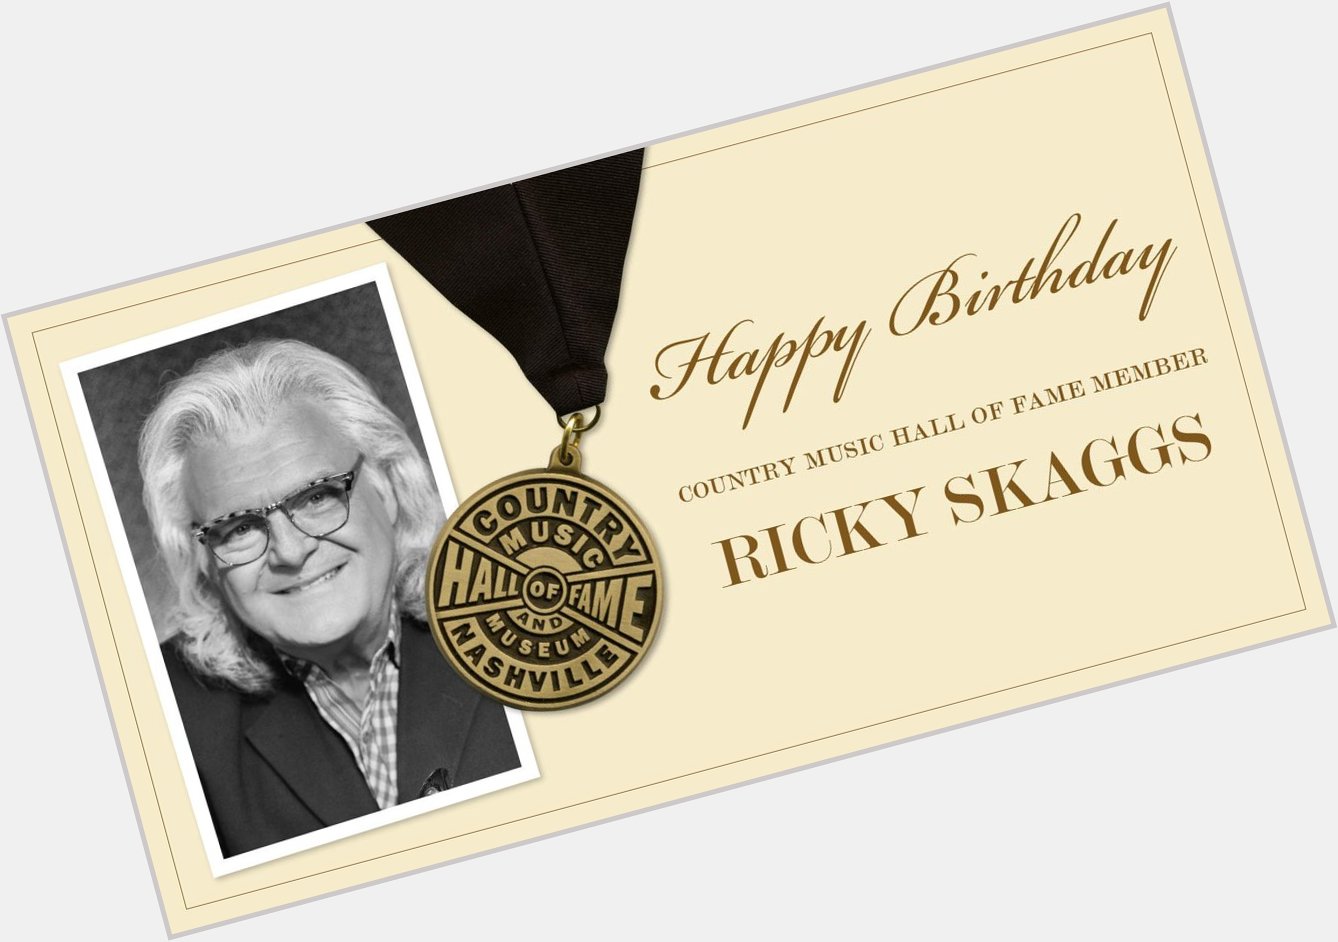 Join us in wishing Country Music Hall of Fame member Ricky Skaggs a very happy birthday! 